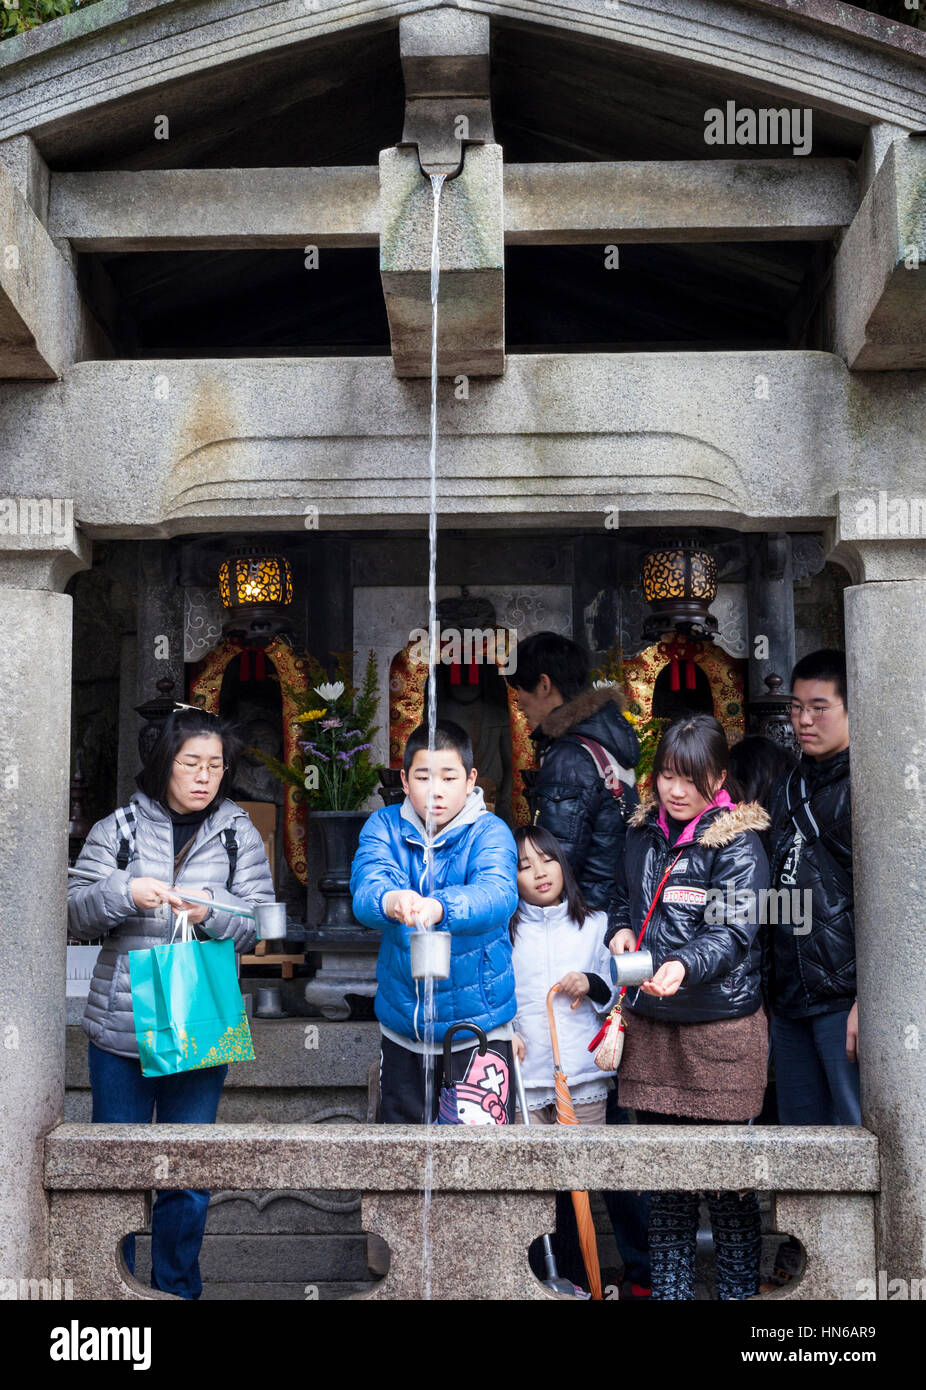 Kyoto, Japan - March 24, 2012: People collecting water from the Otowa-no-taki waterfall at Kiyomizu temple in Kyoto. Visitors drink the water which is Stock Photo